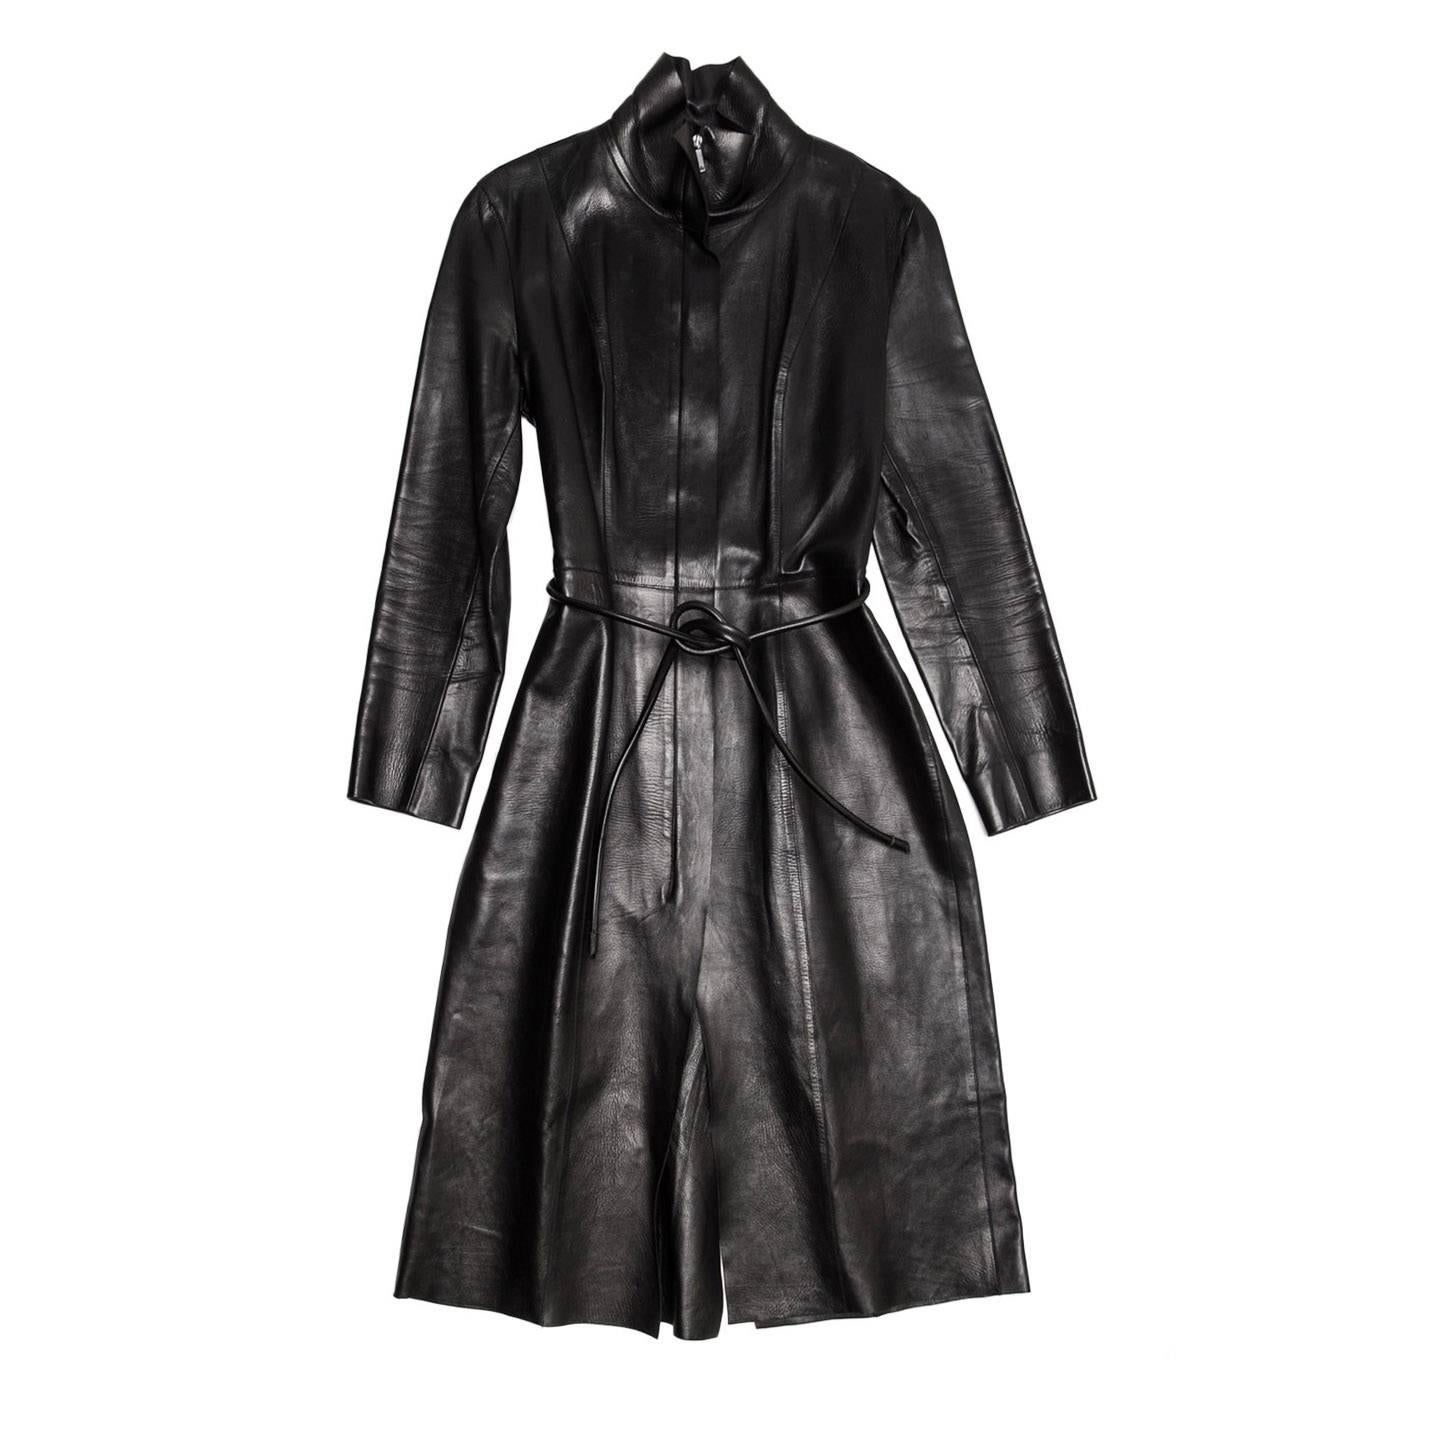 This black leather coat is a composition of very clean and elegant panels with raw edge finishing and top stitched together. The standing collar has a raw edge cut too, there is no lining and the front opening fastens with a black metallic open